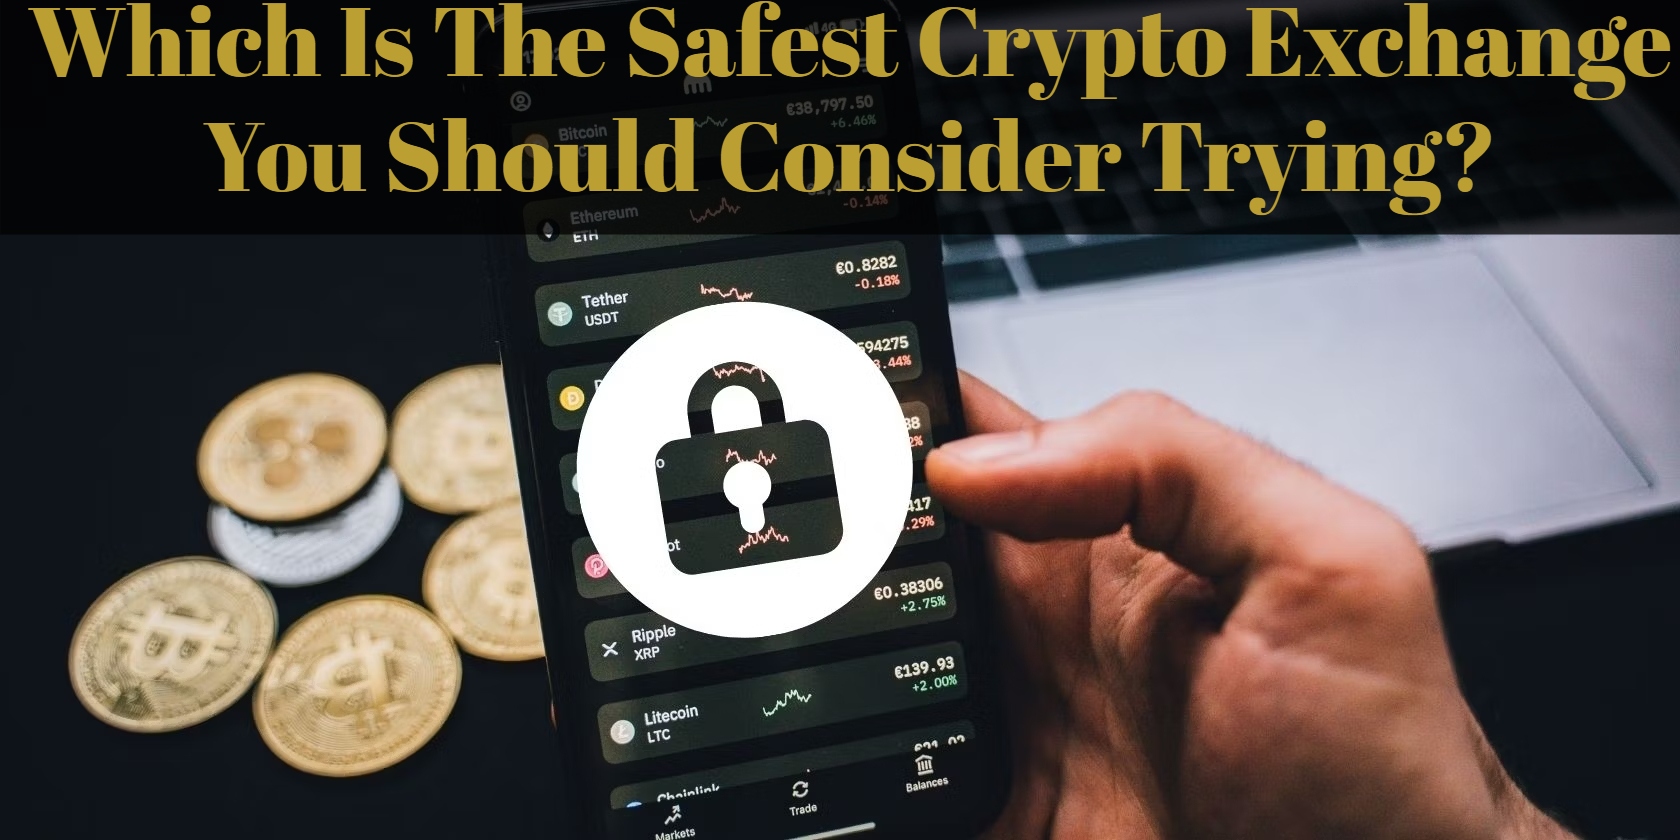 Which Is The Safest Crypto Exchange You Should Consider Trying?